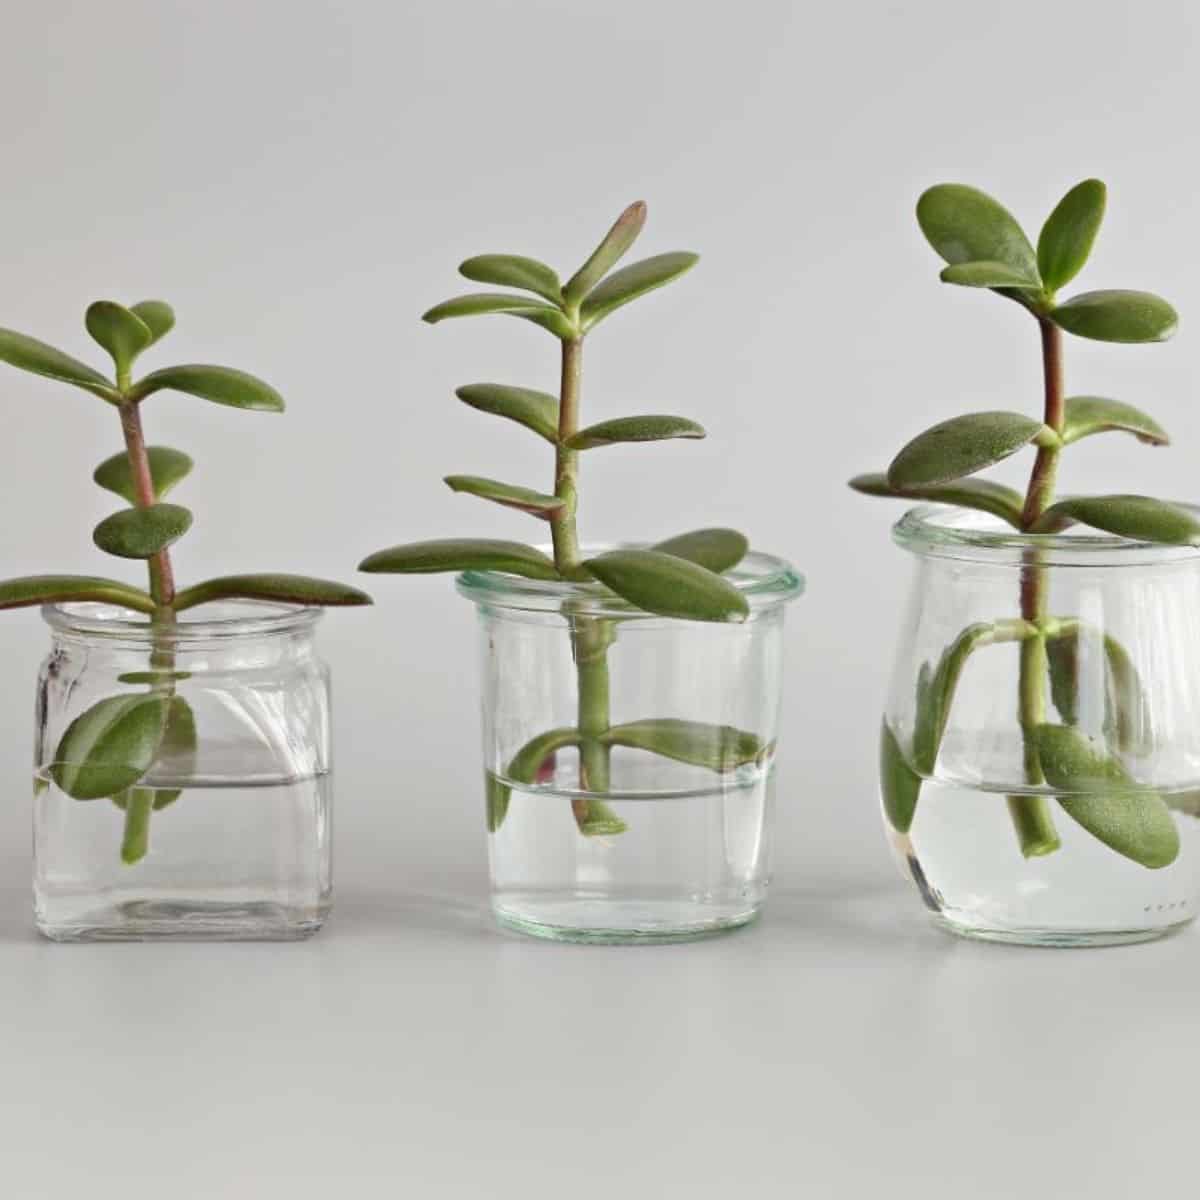 Succulent stems in glass jars with water.